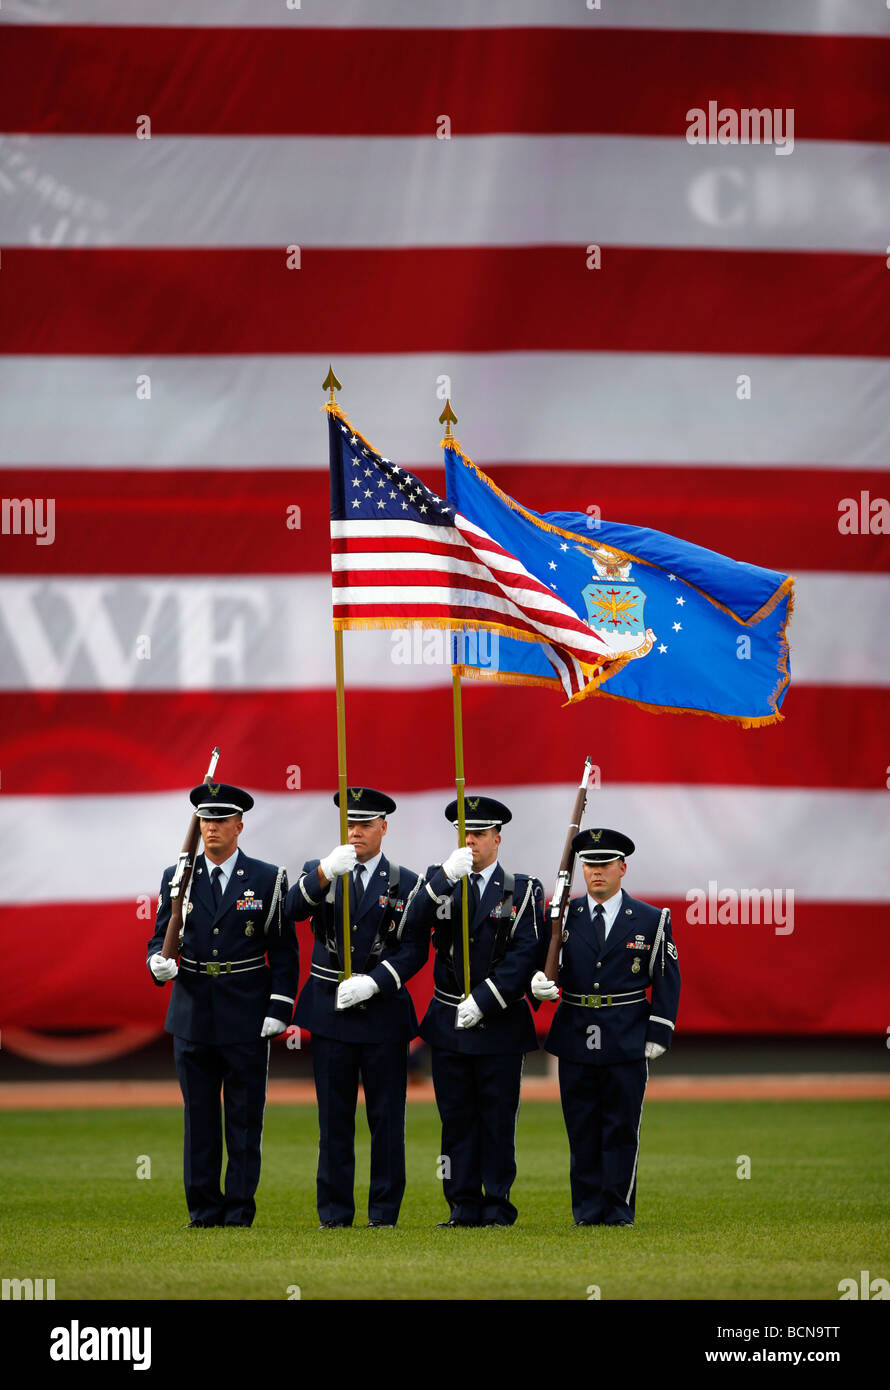 US Air Force Color Guard, Fenway Park in Boston, Massachusetts Stockfoto